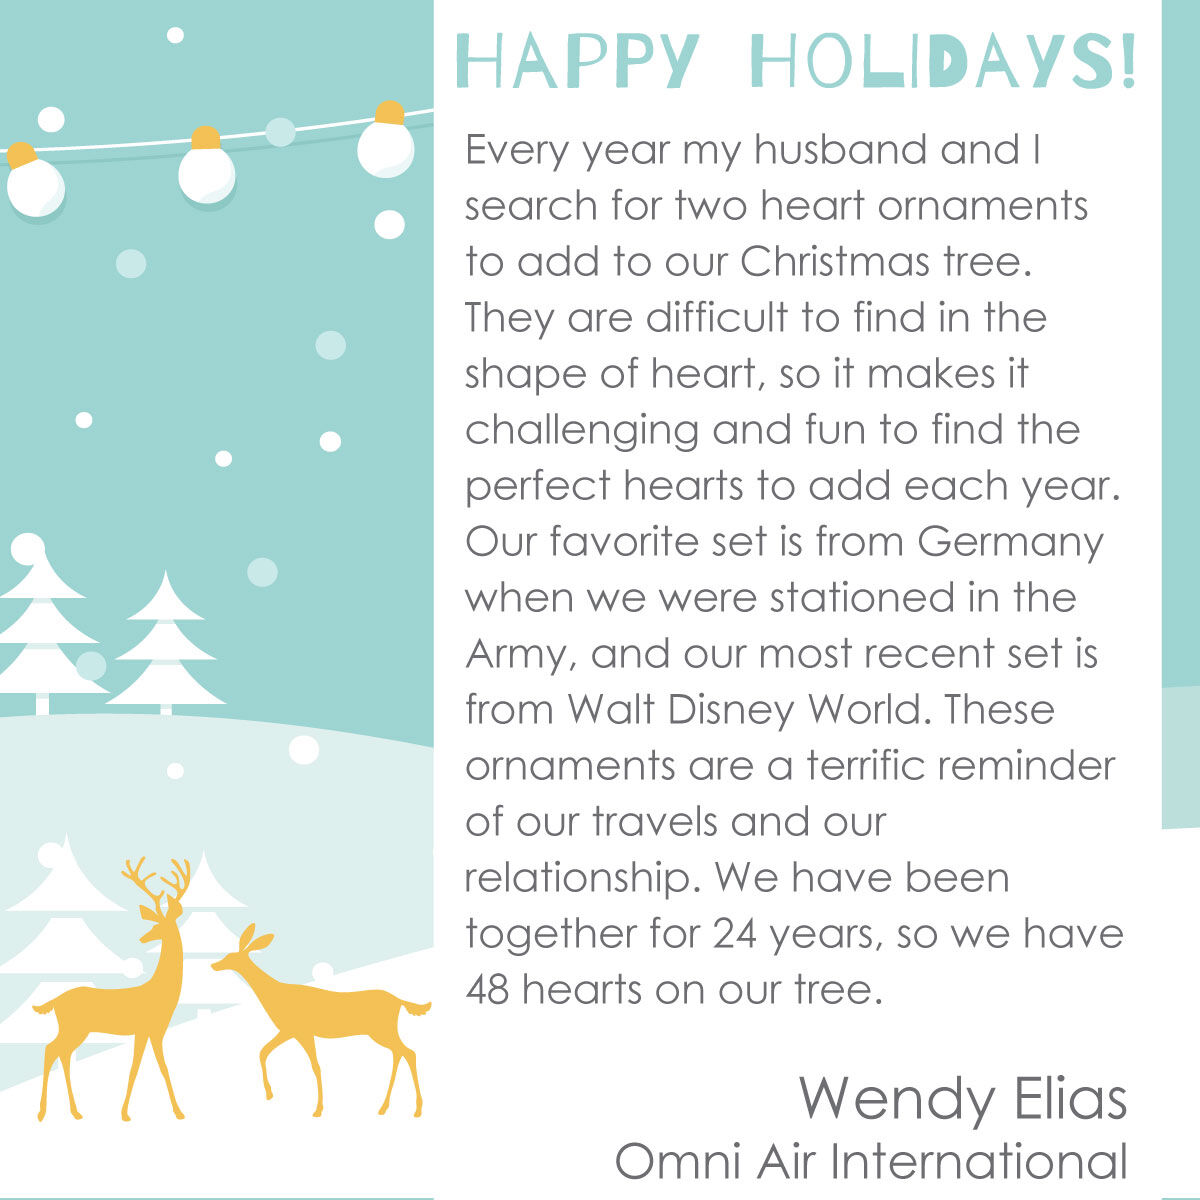 We asked our employees to share their favorite holiday memories and traditions. What special holiday decorations do you have? #holidays #memories